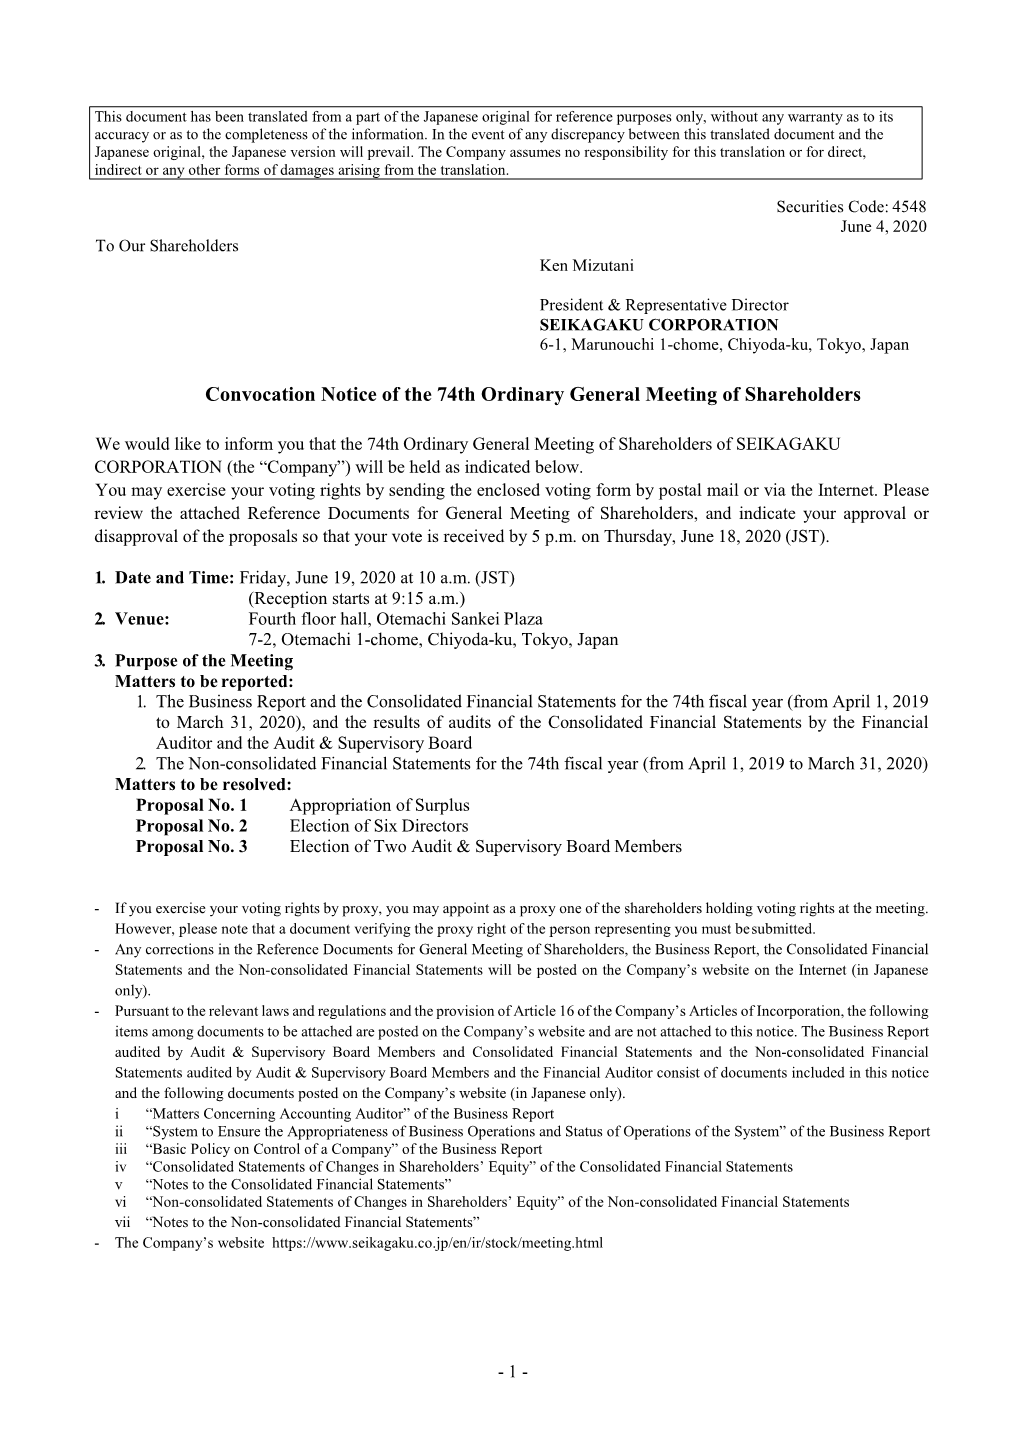 Convocation Notice of the 74Th Ordinary General Meeting of Shareholders